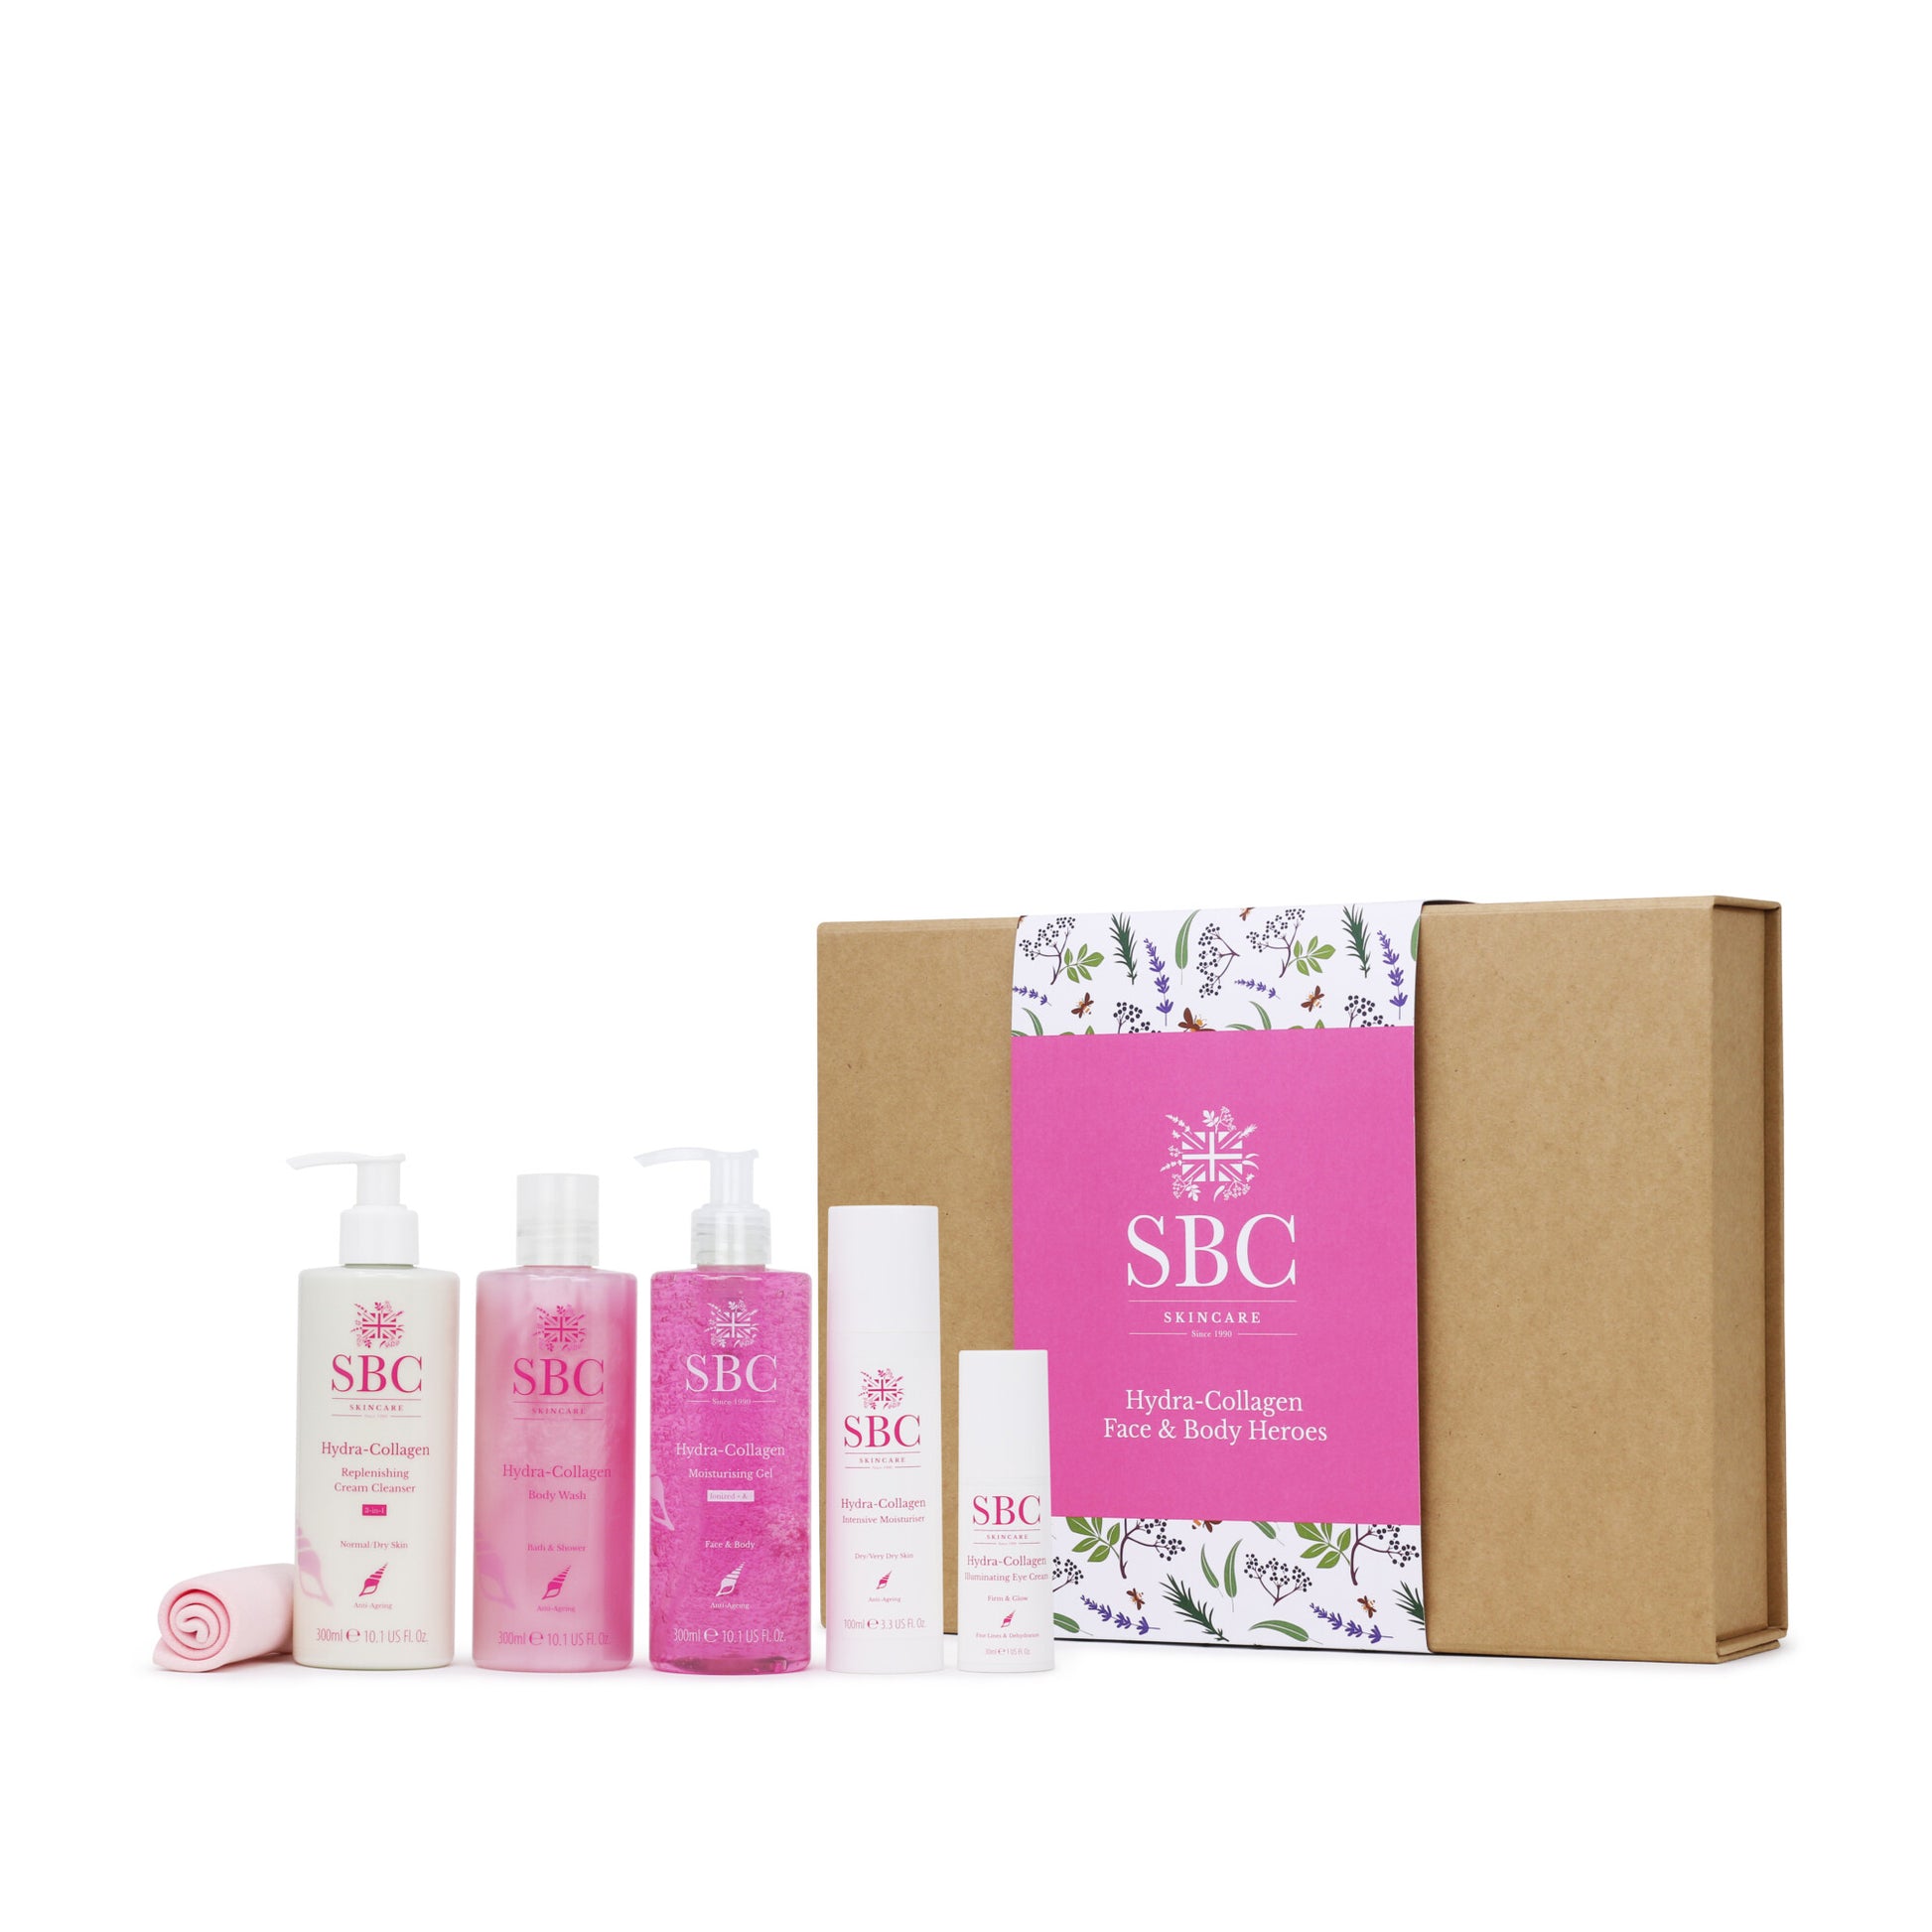 SBC Skincare’s Hydra-Collagen Face & Body Heroes gift set on a white background 